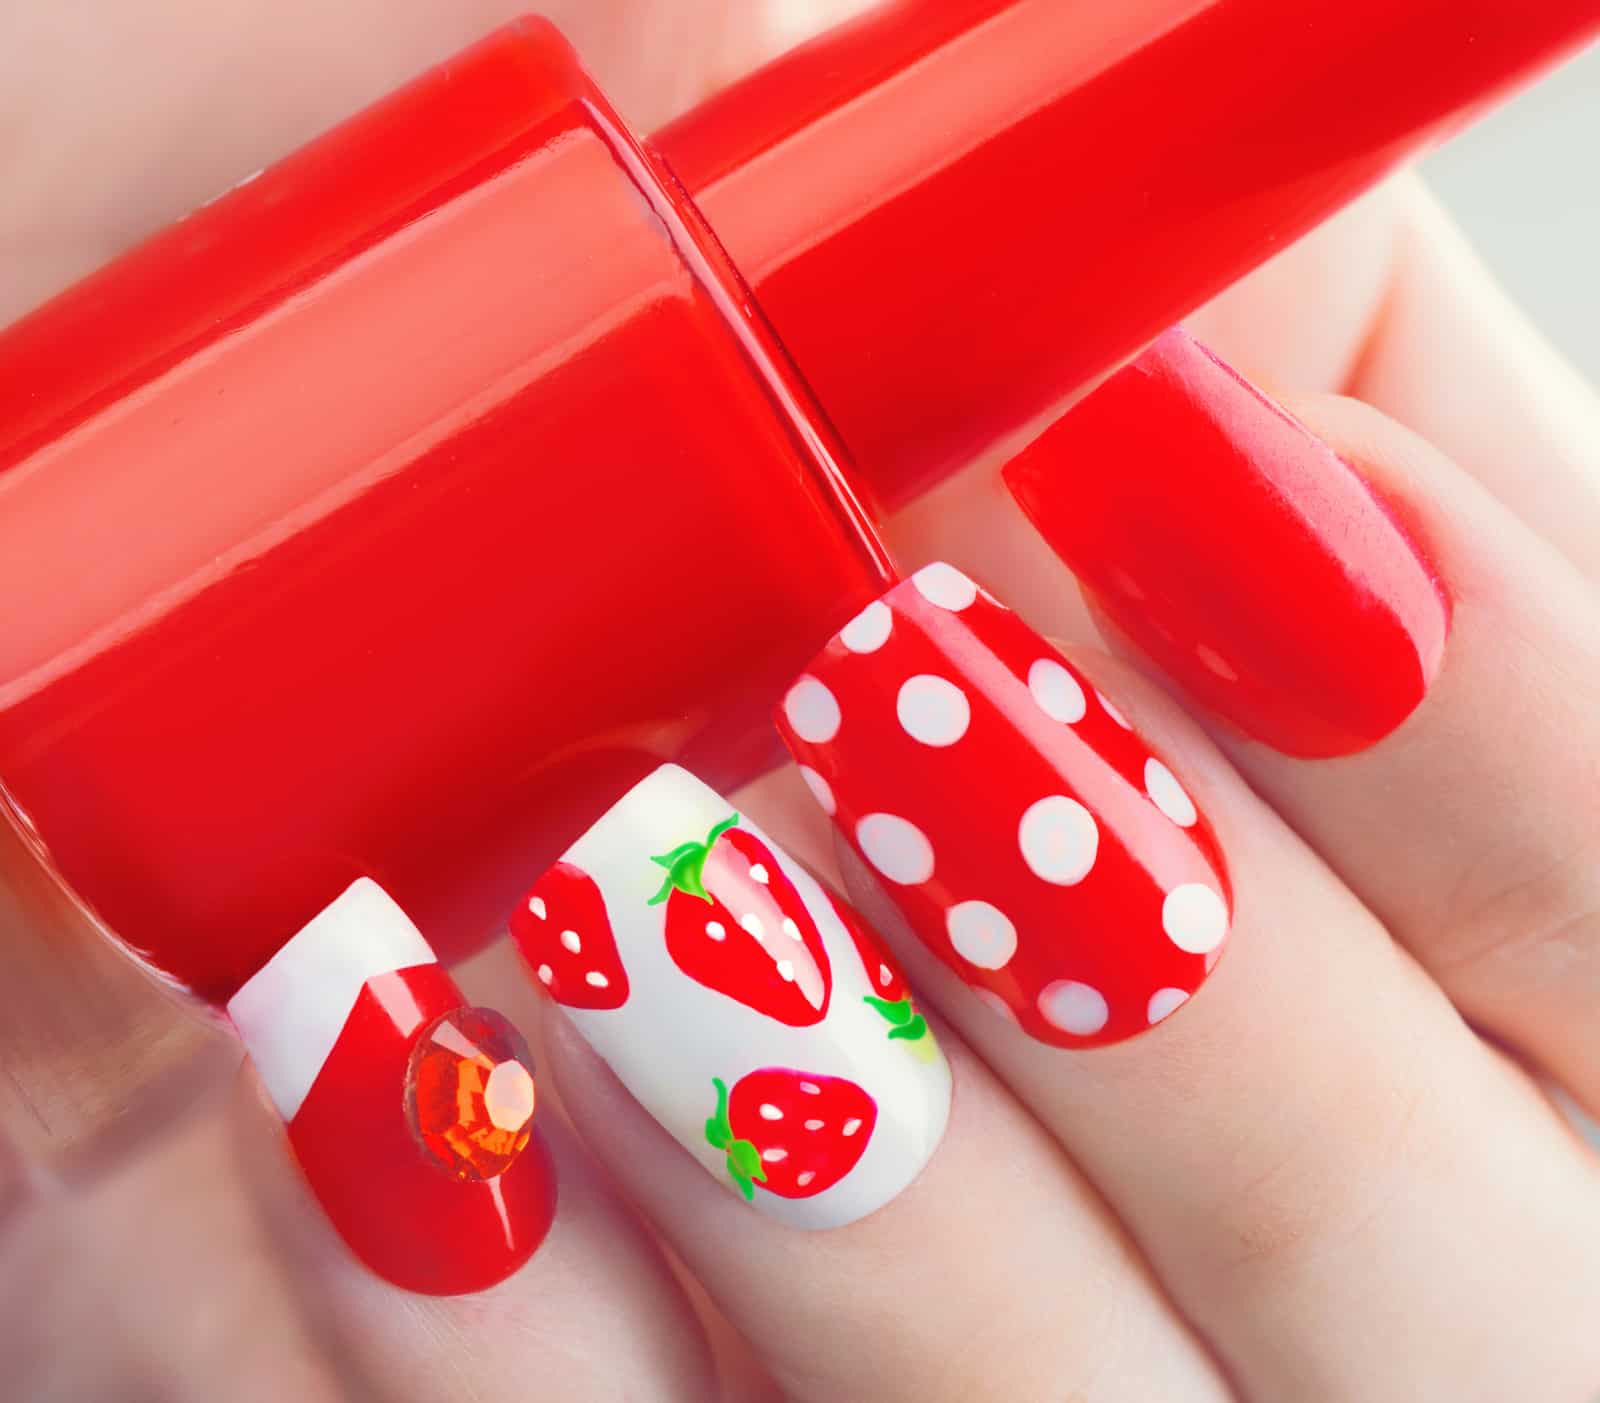 Nail art manicure. Summer style red manicure with strawberries and polka dots